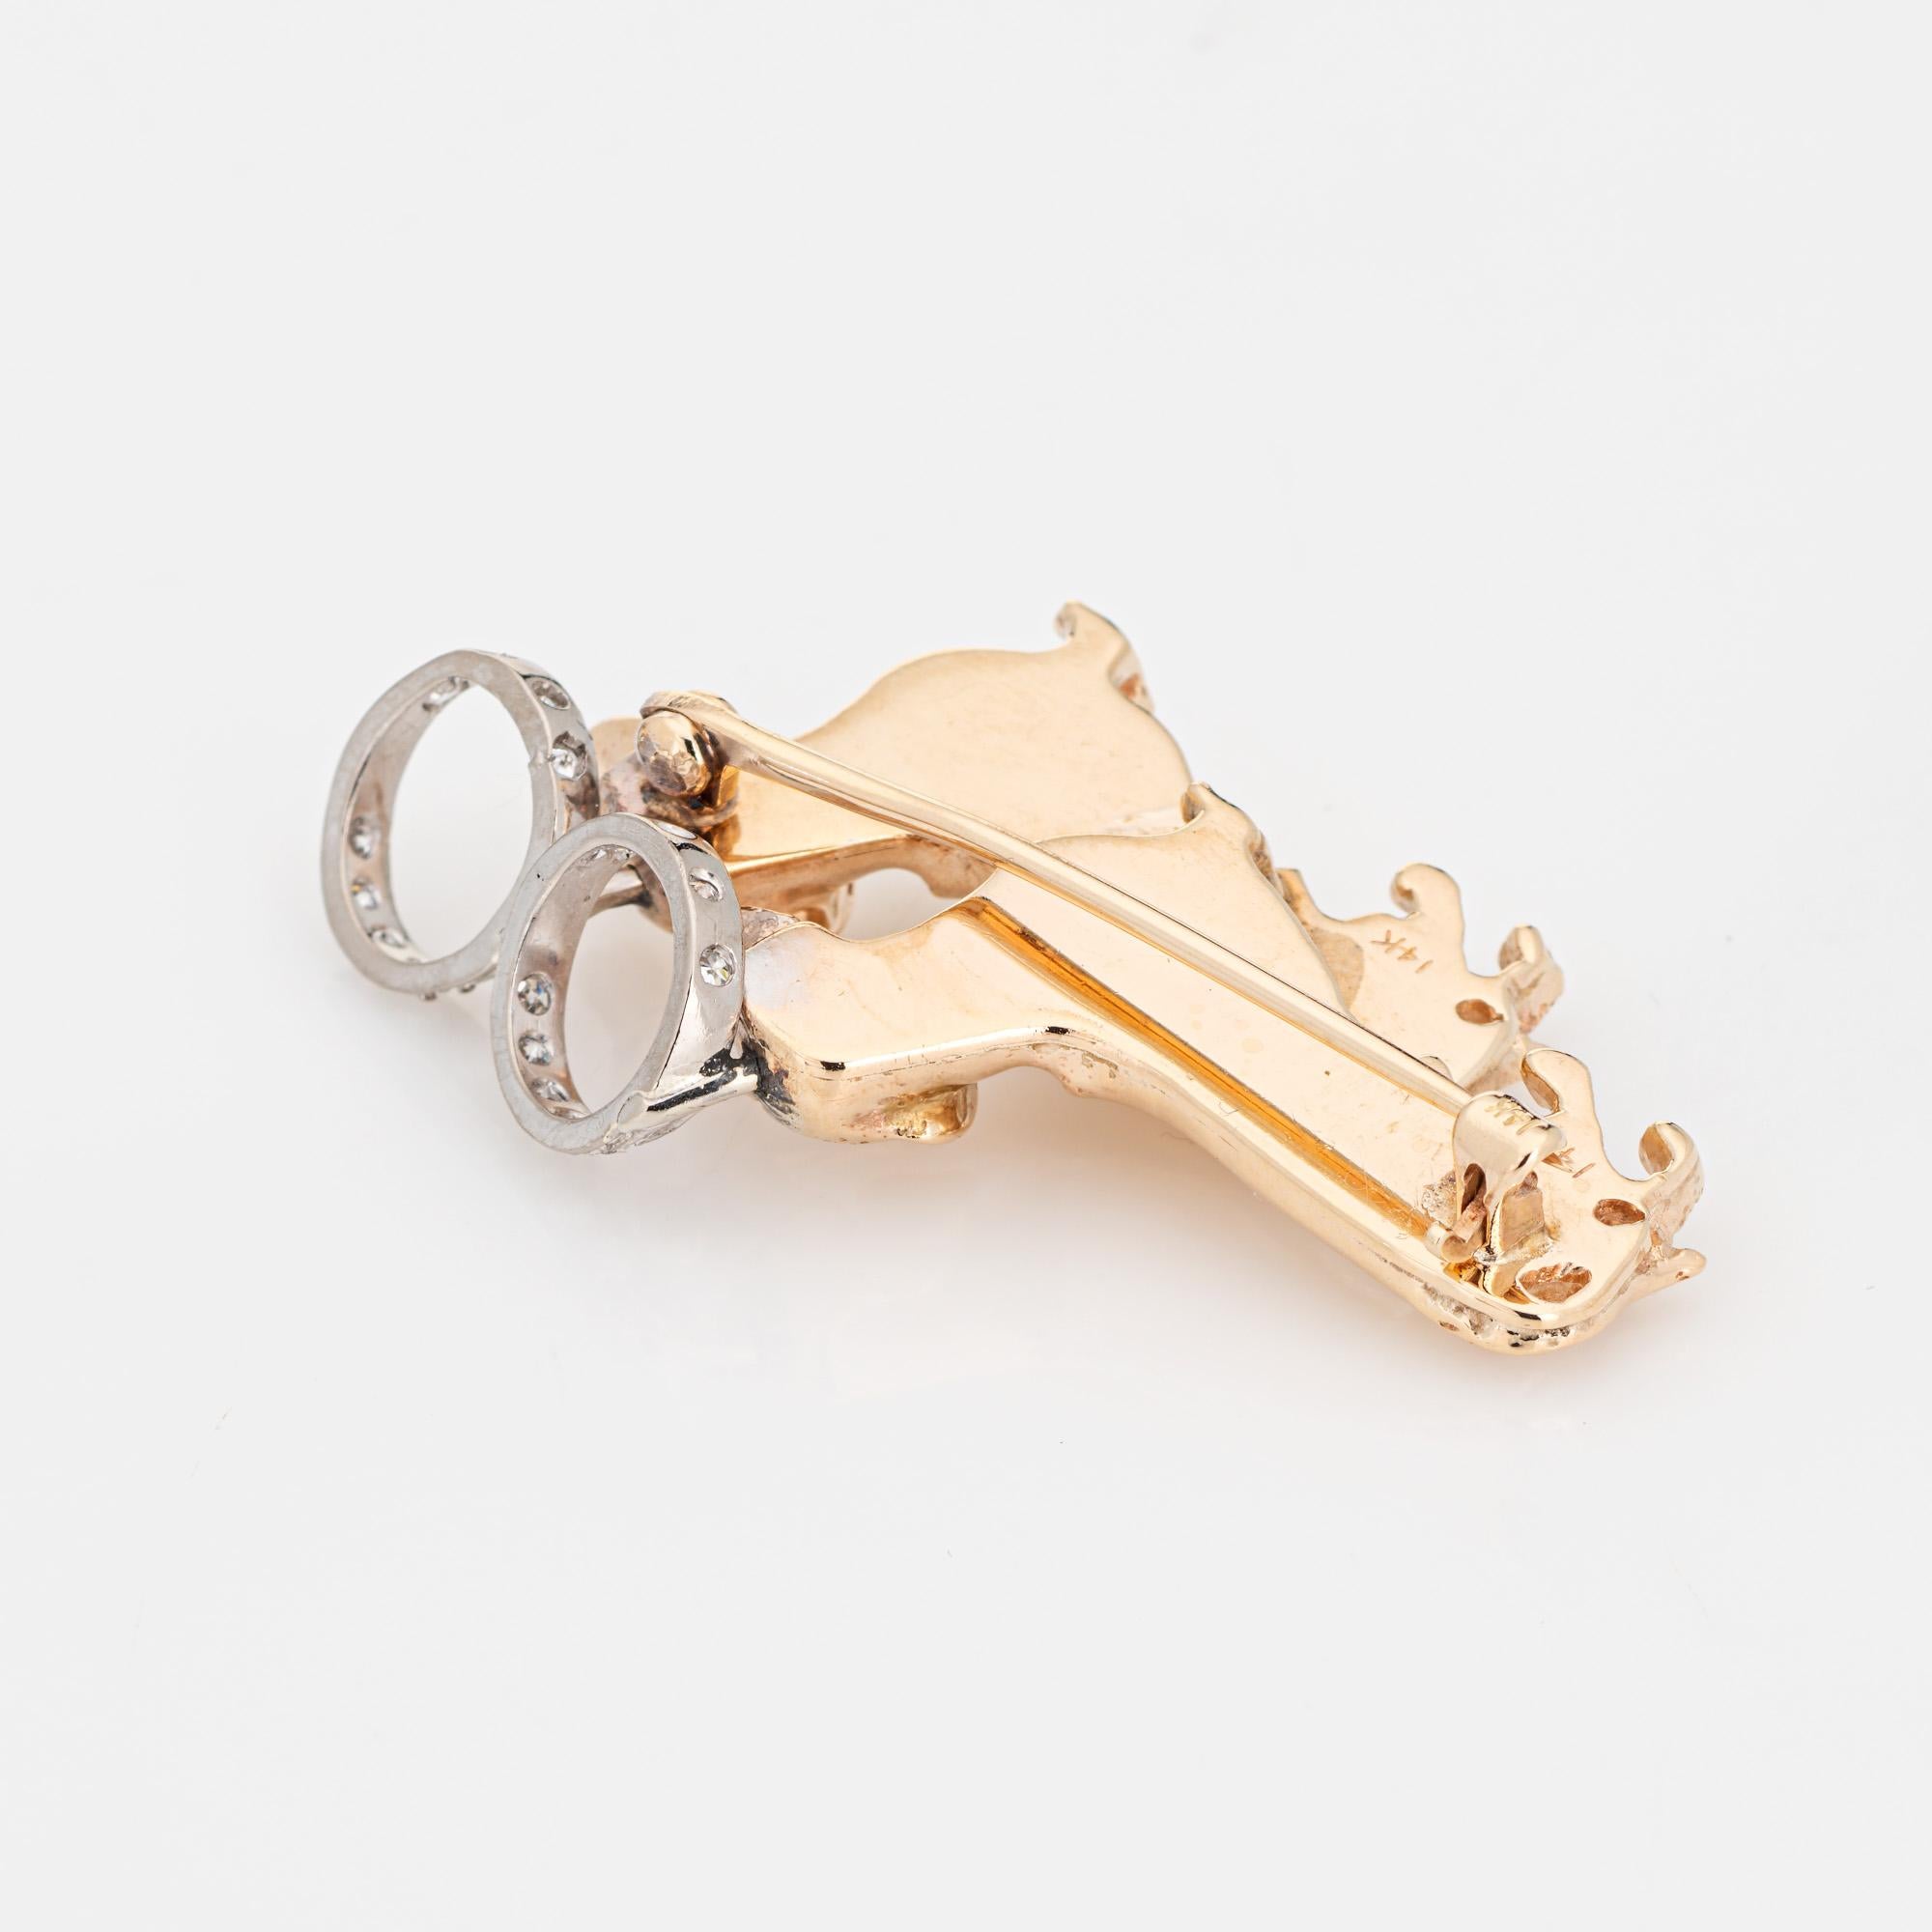 Finely detailed vintage double Dachshund pendant/brooch crafted in 14k yellow gold (circa 1960s to 1970s).  

Diamonds are set into the halos and total an estimated 0.09 carats (estimated at H-I color and VS2-SI2 clarity). Two small approx. 1/2mm